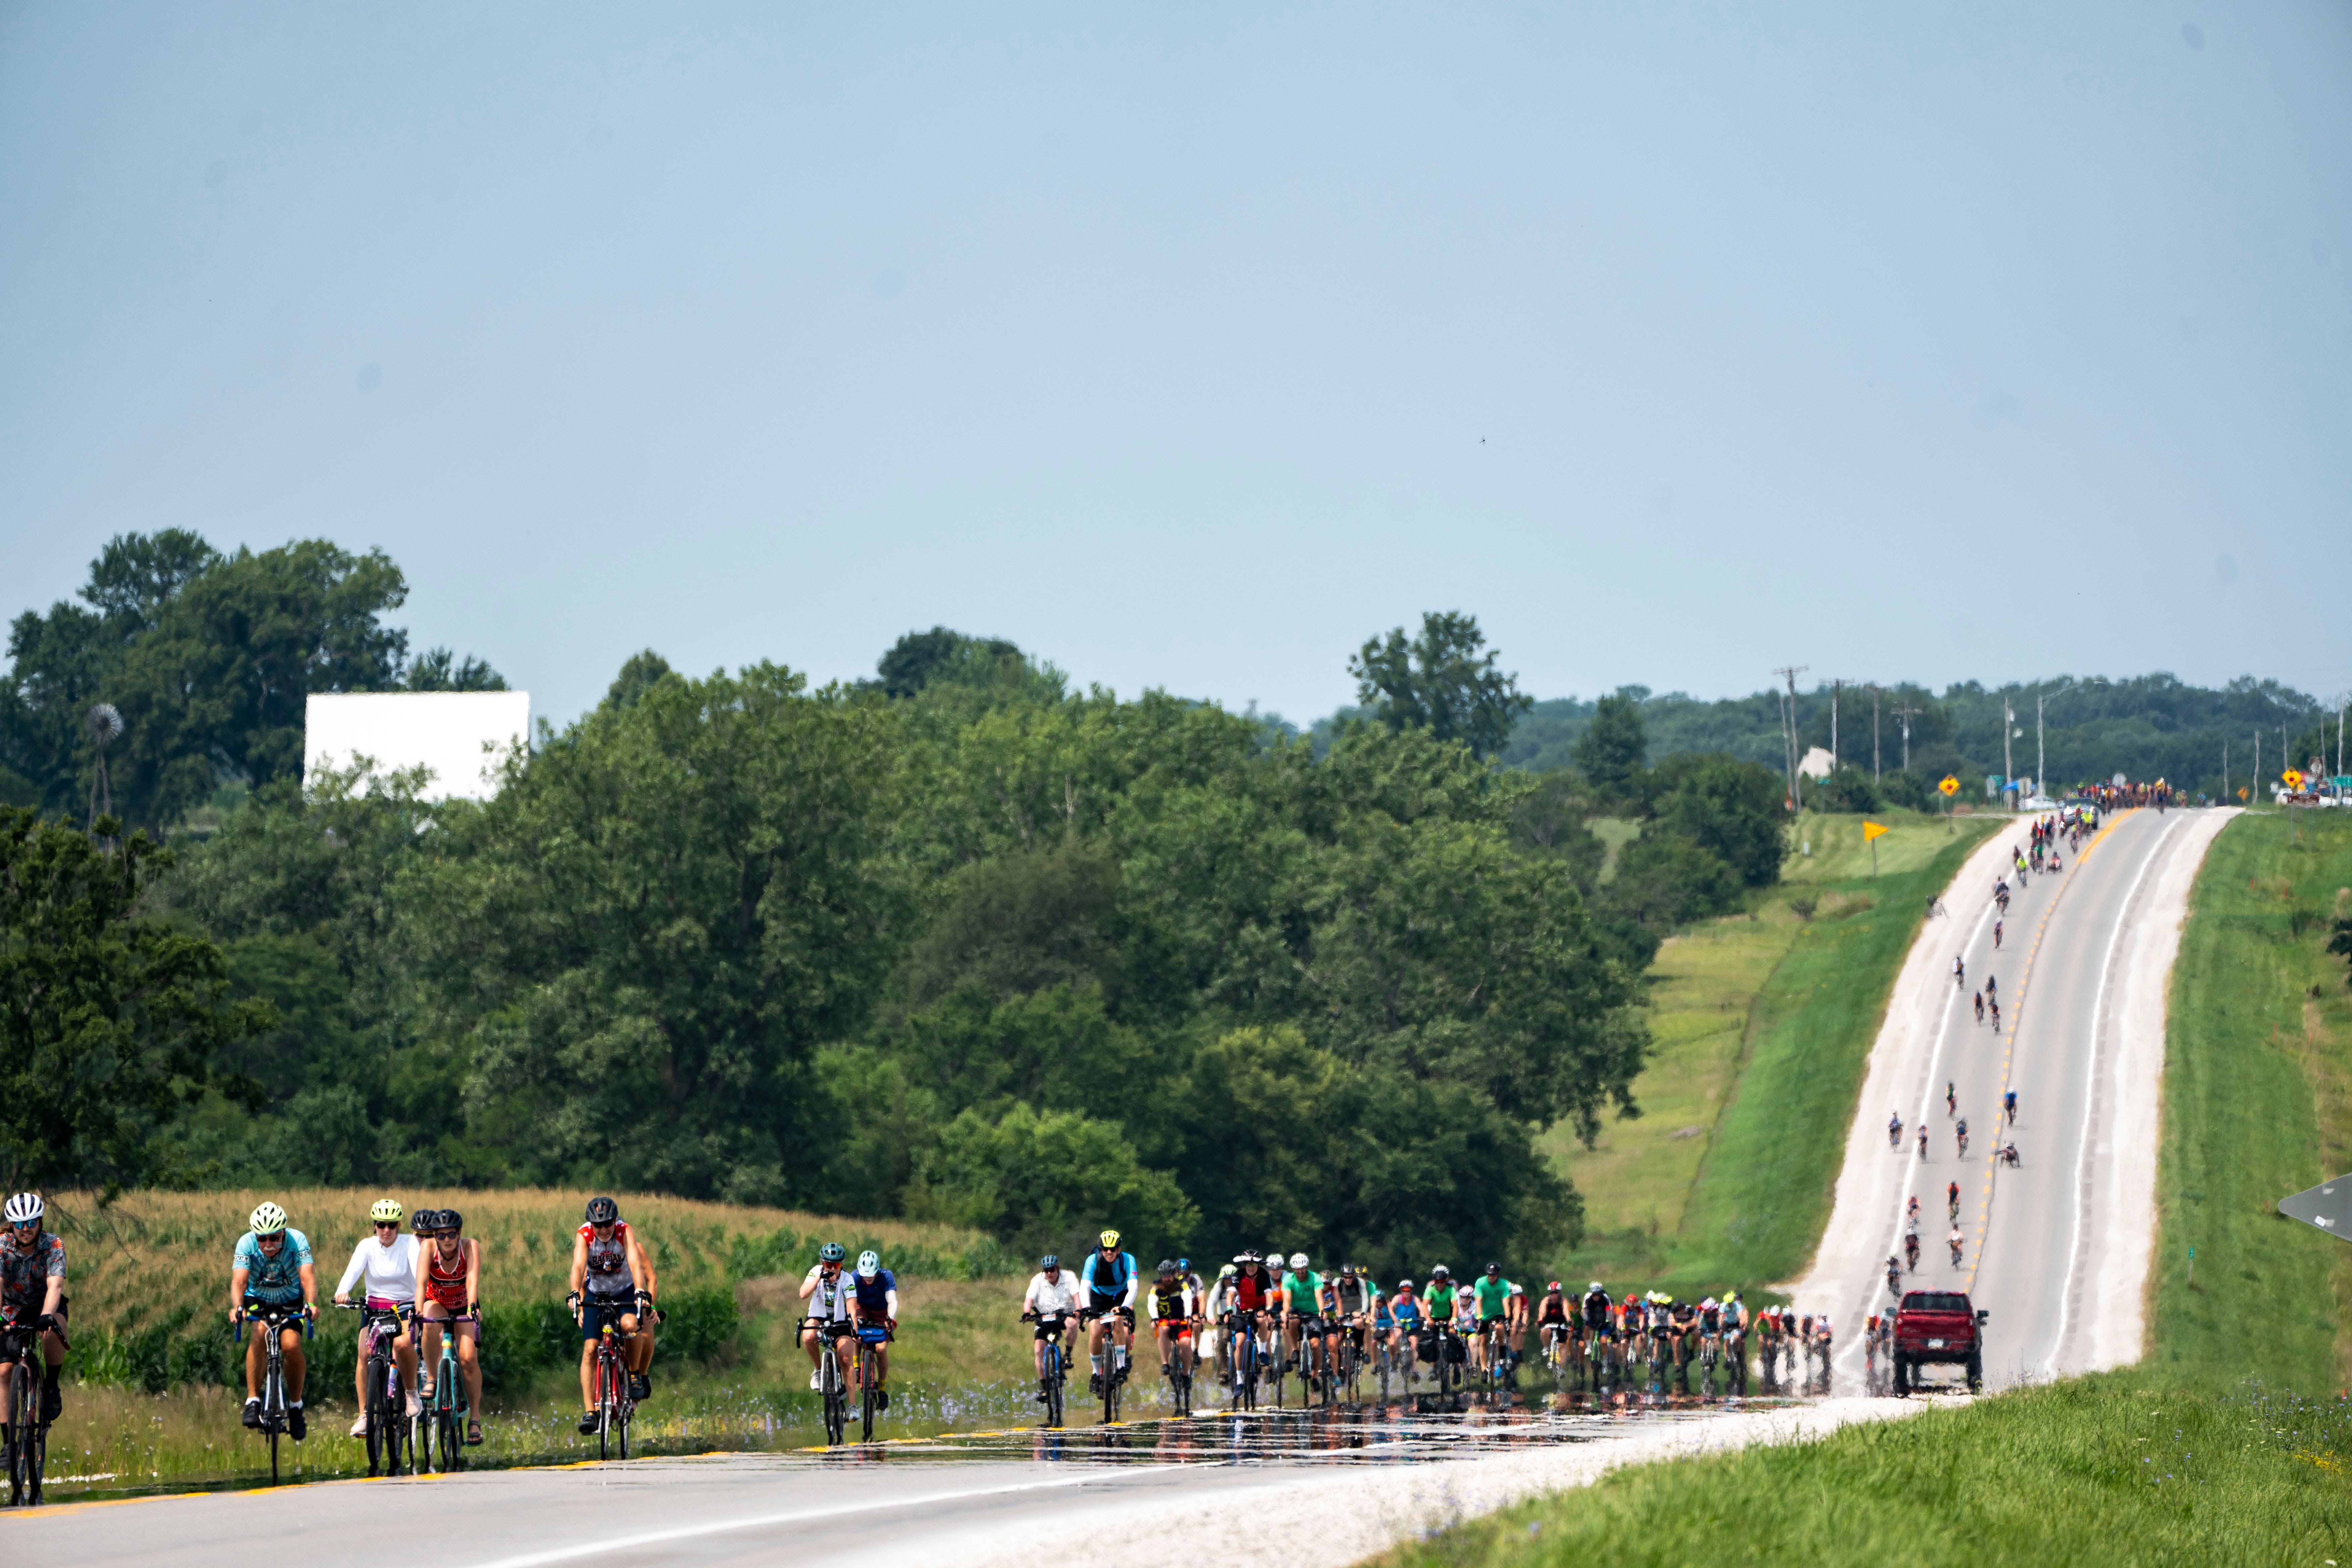 RAGBRAI passes through Des Moines metro for 2nd year in a row, attracting more riders